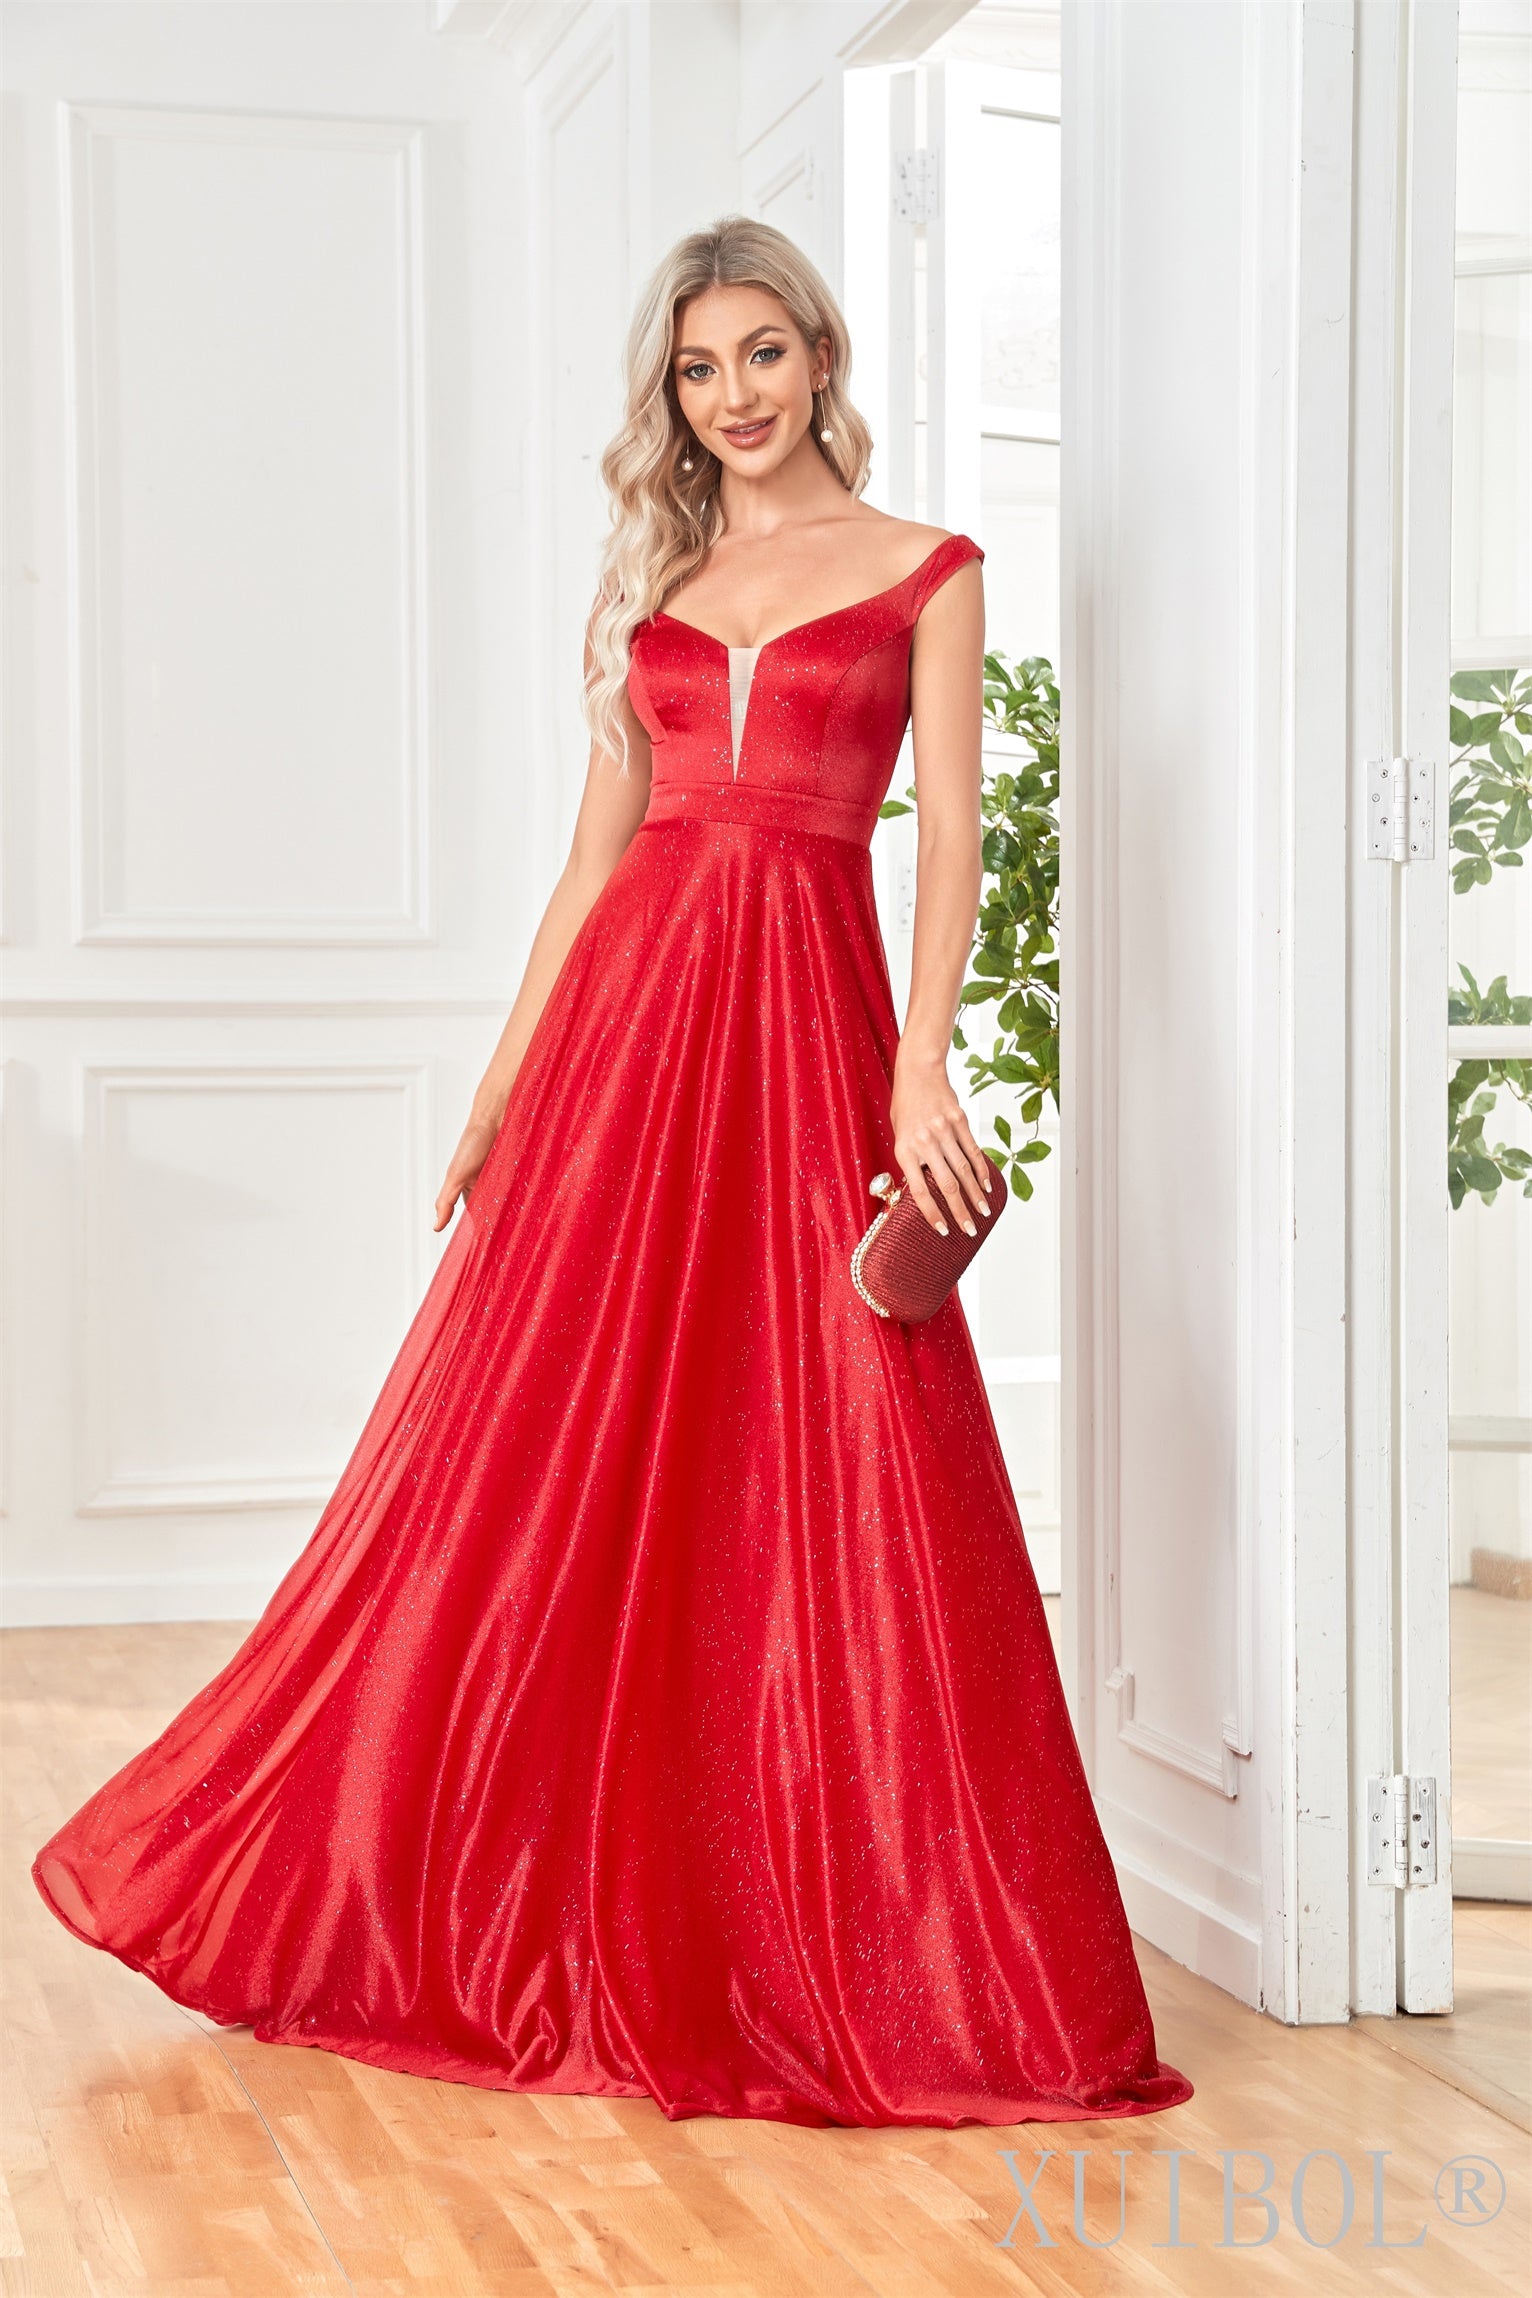 XUIBOL | Red_Hot_Silver_Dress_Red